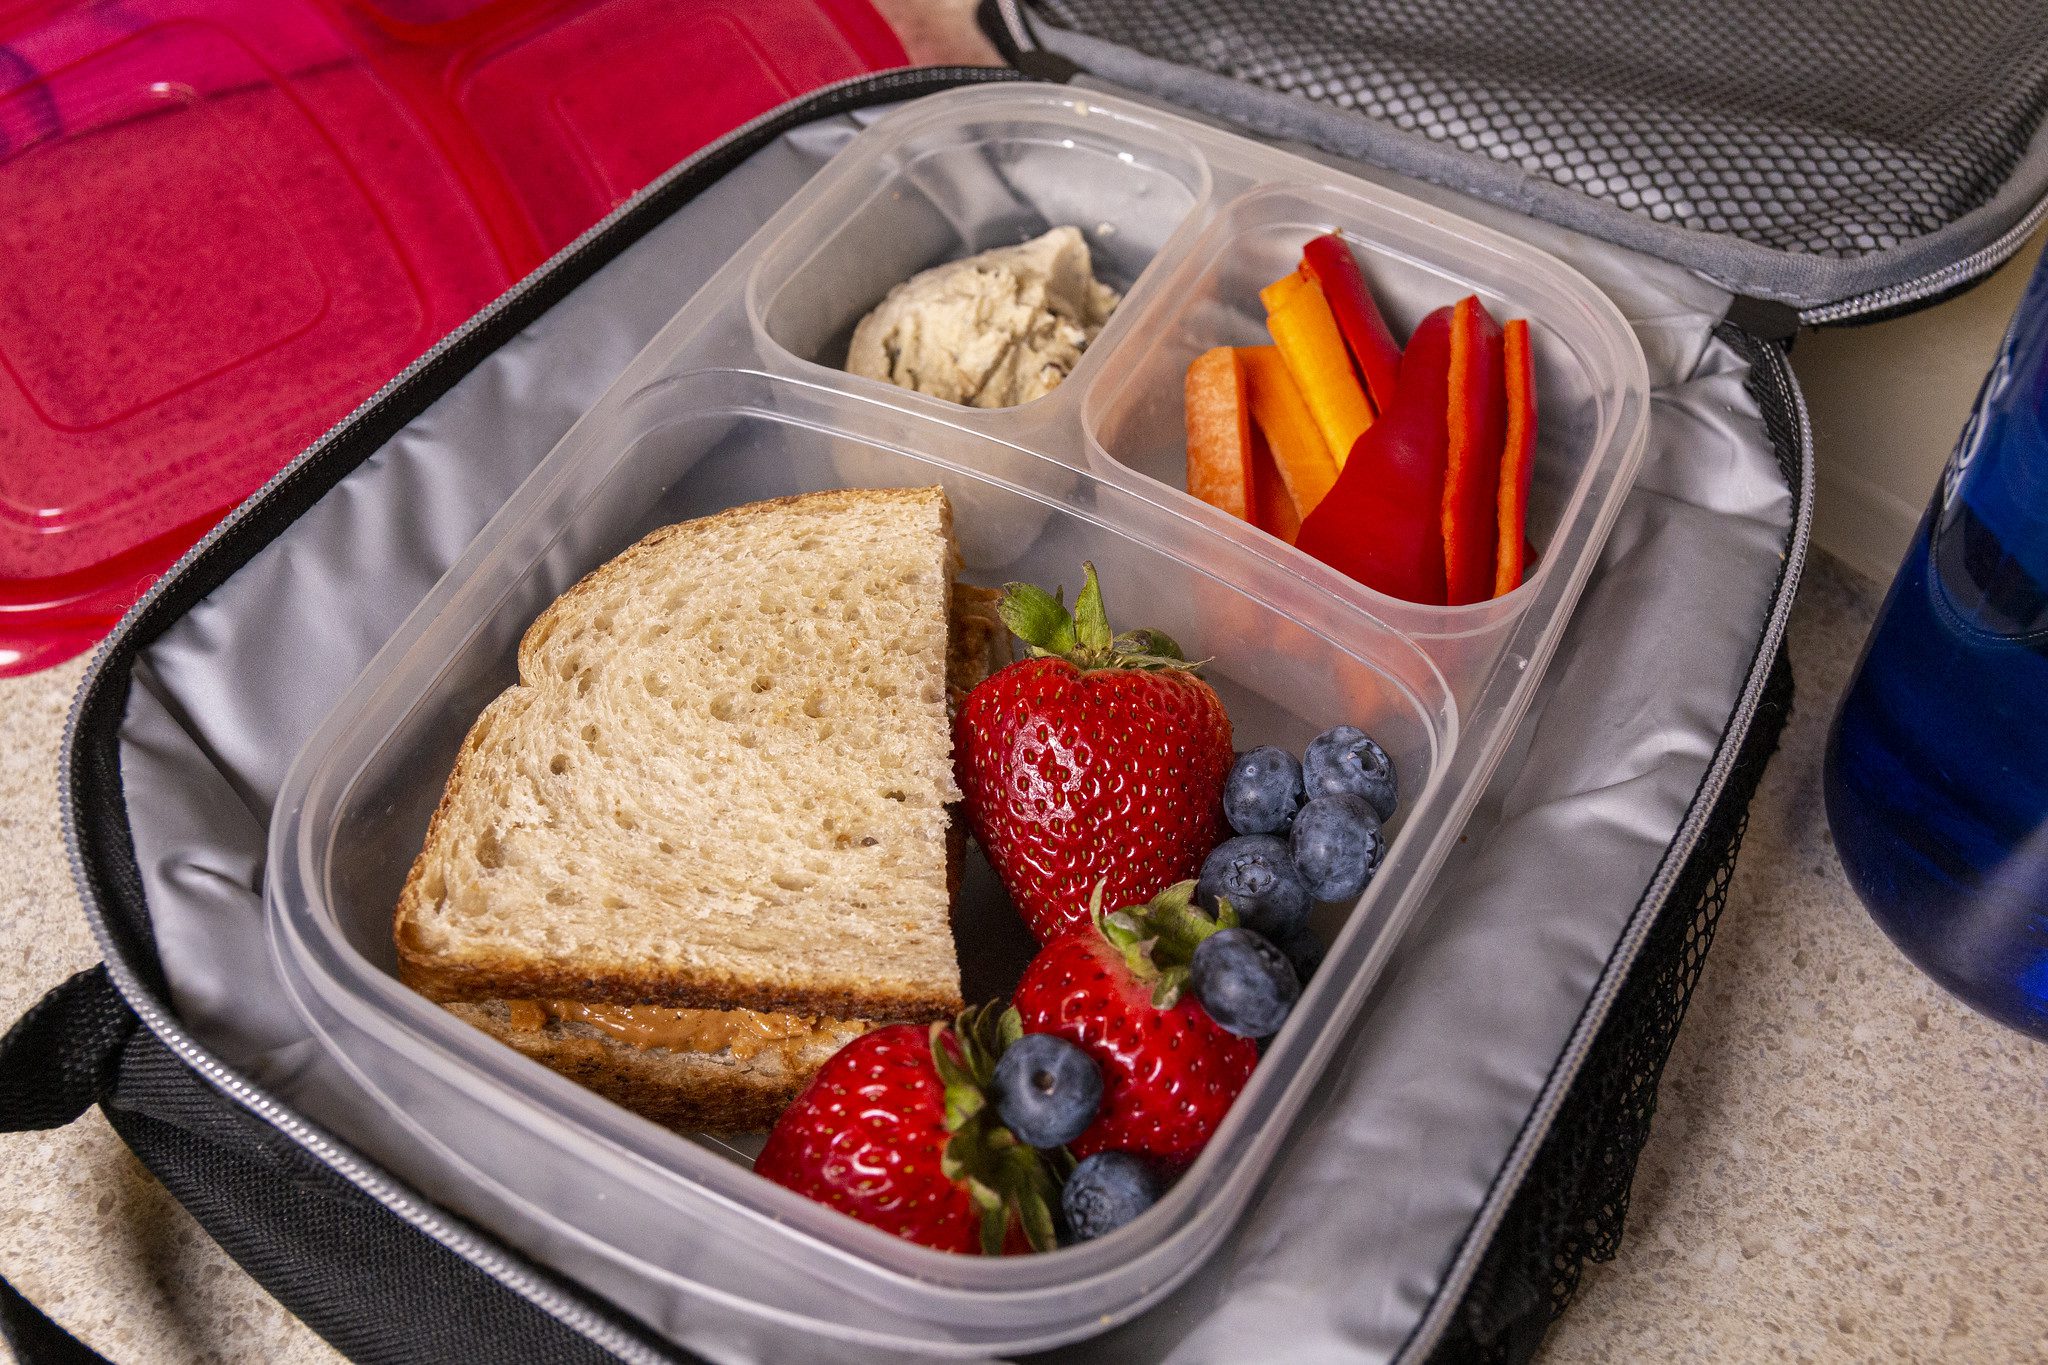 A variety of foods in a lunch box